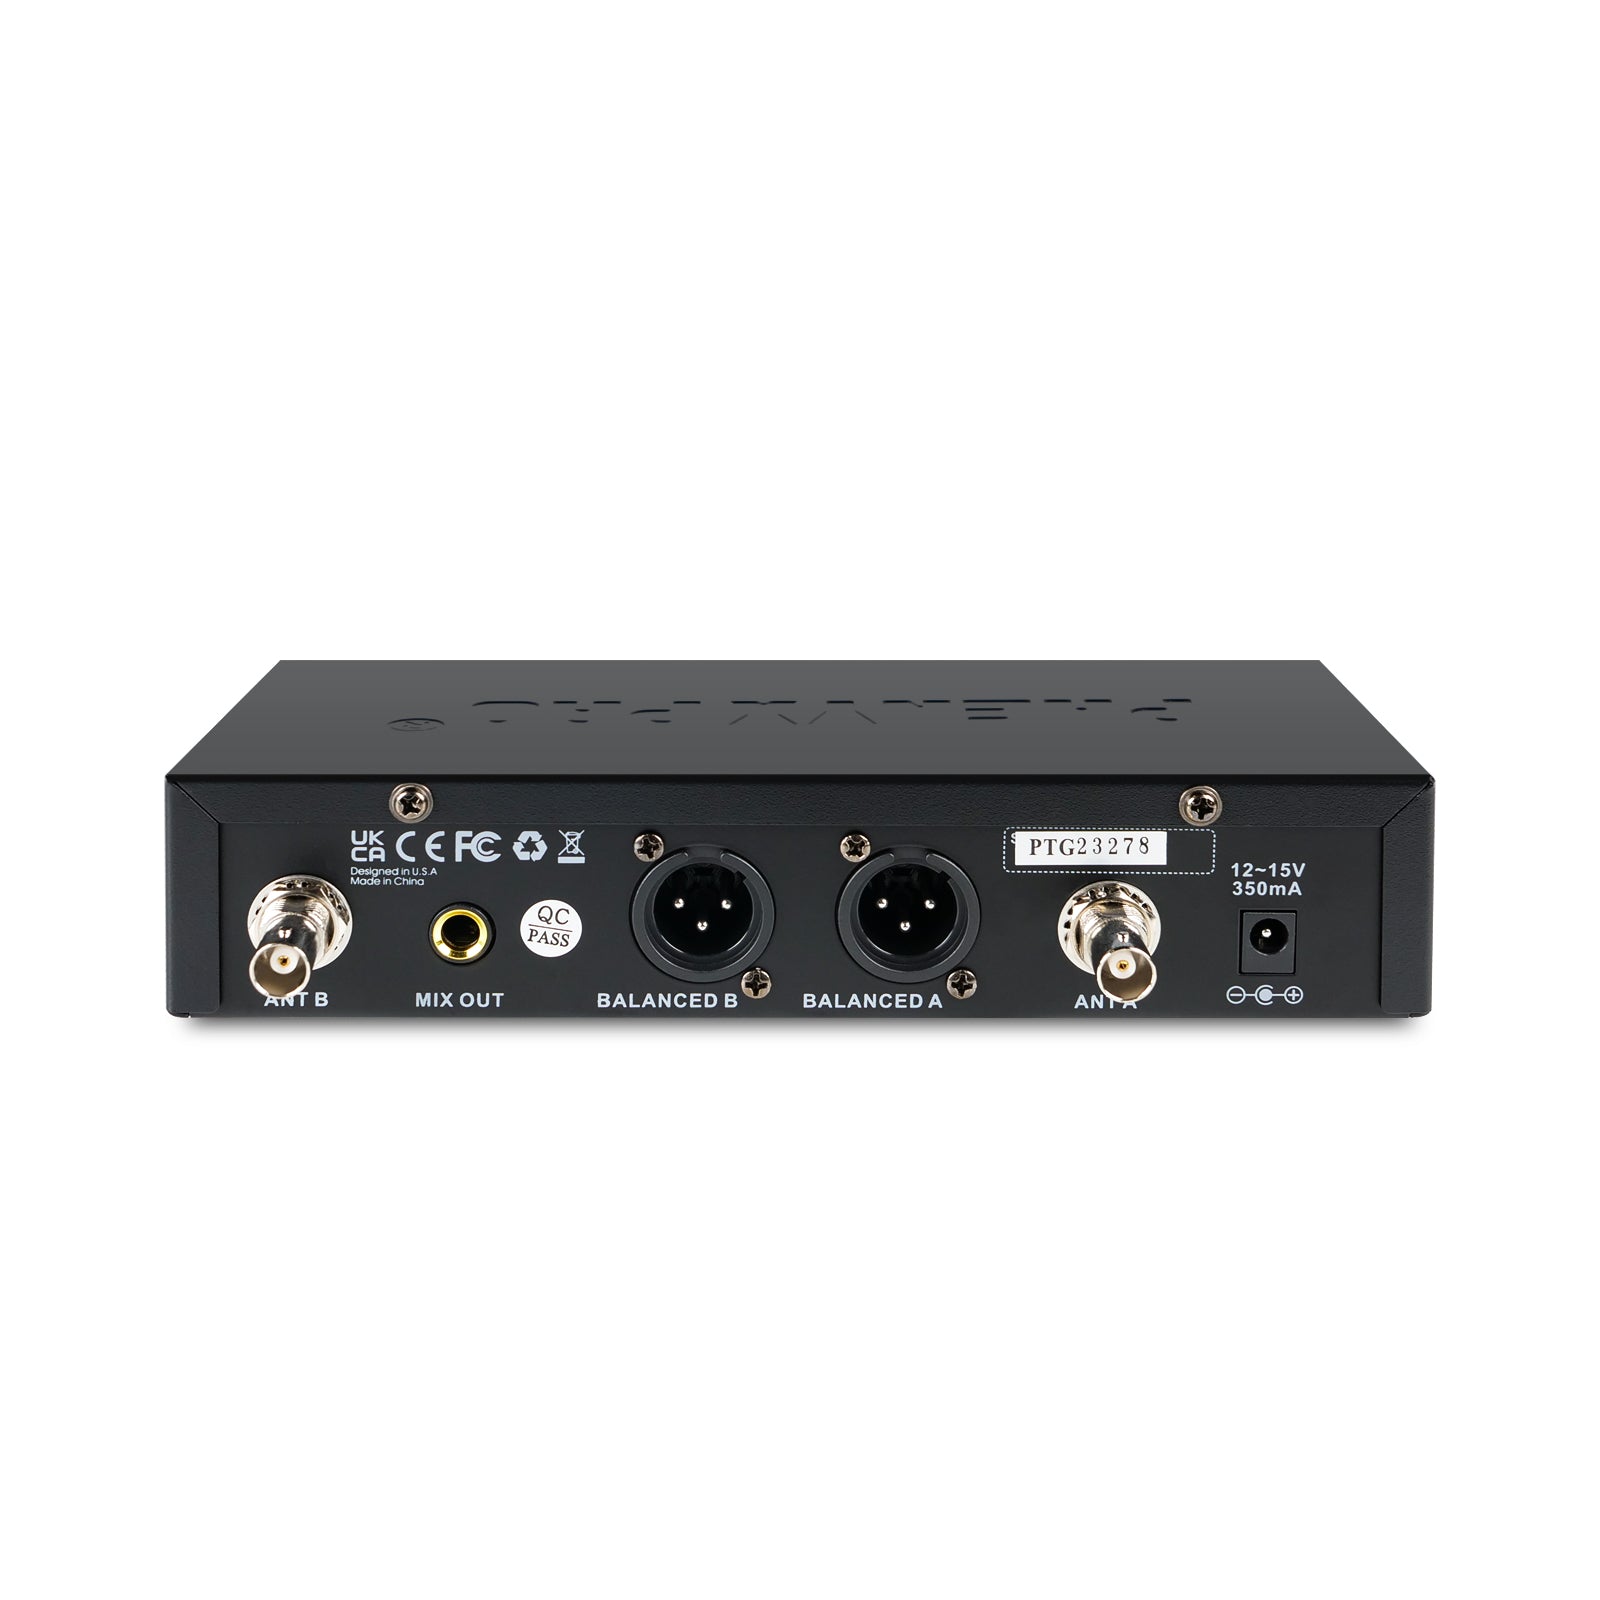 PWR-71 | Dual UHF Wireless Microphone Receiver for PTU-71 System